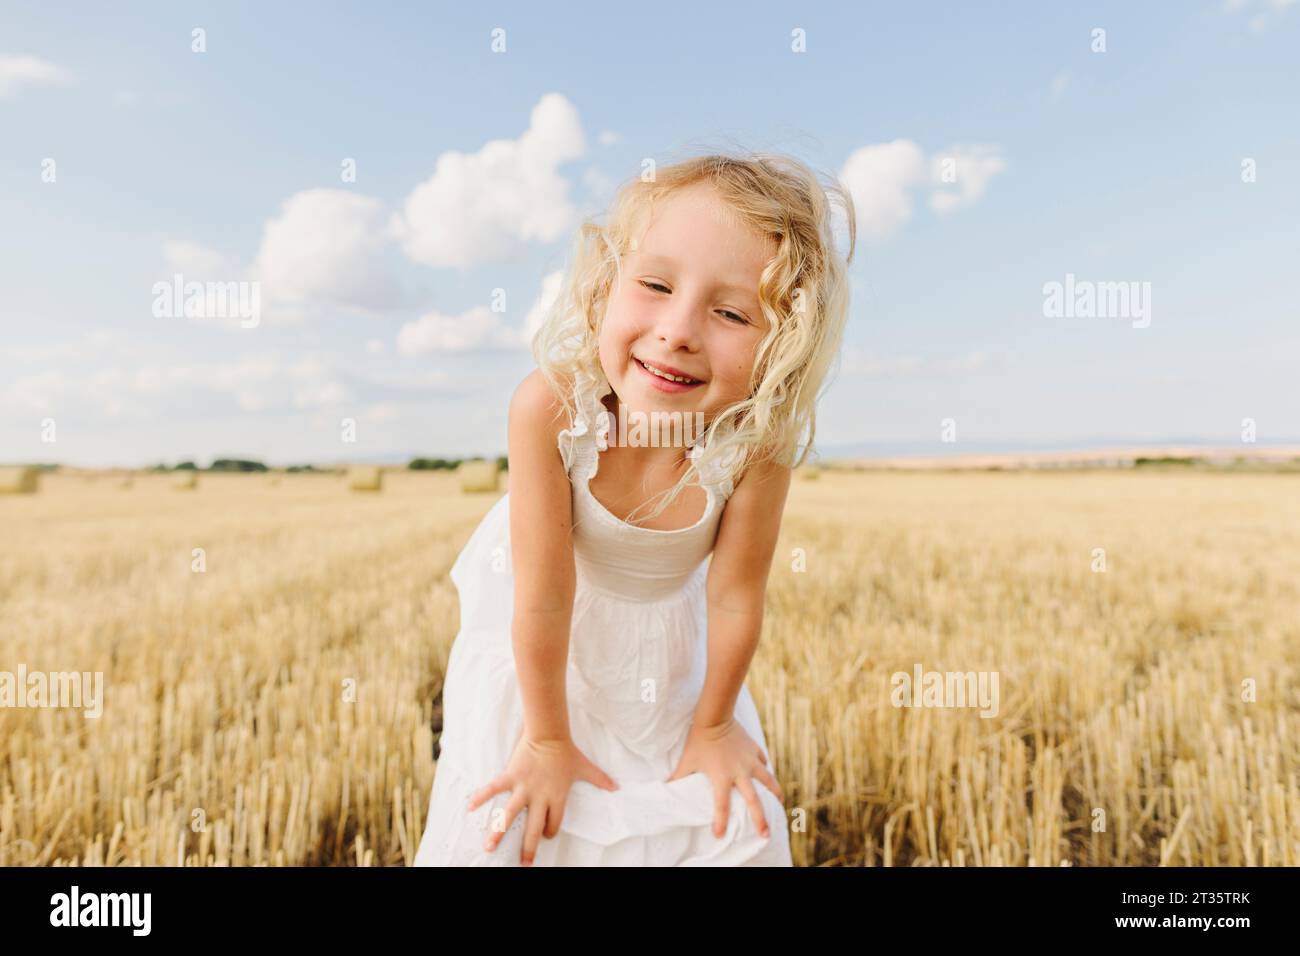 Happy blond girl standing in stubble field with hands on knees Stock Photo